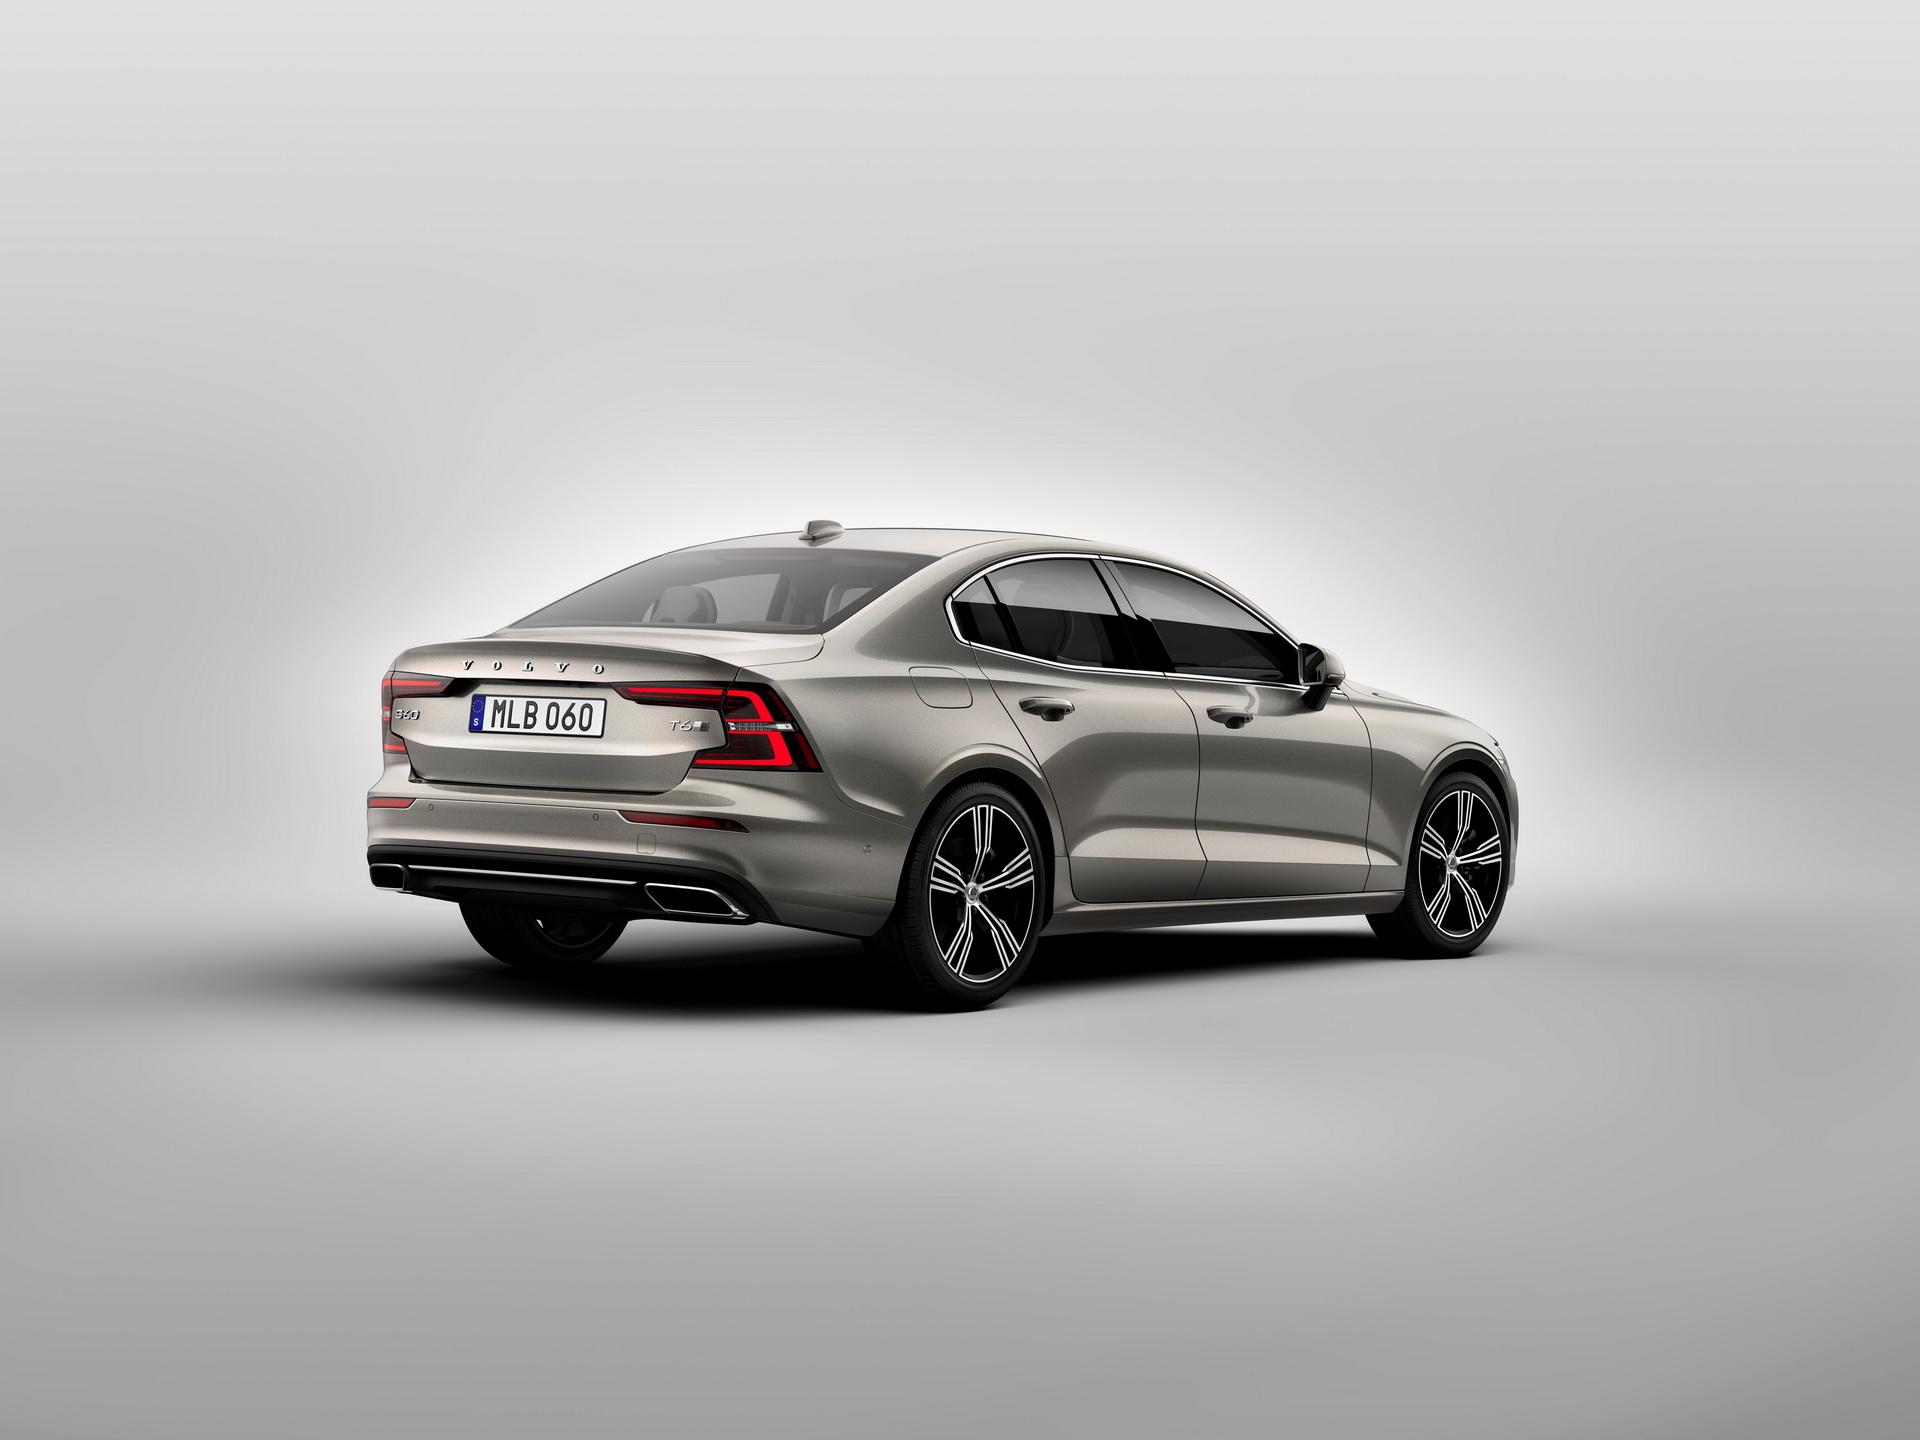 [Image: 1bba84d7-2019-volvo-s60-unveiled-2.jpg]